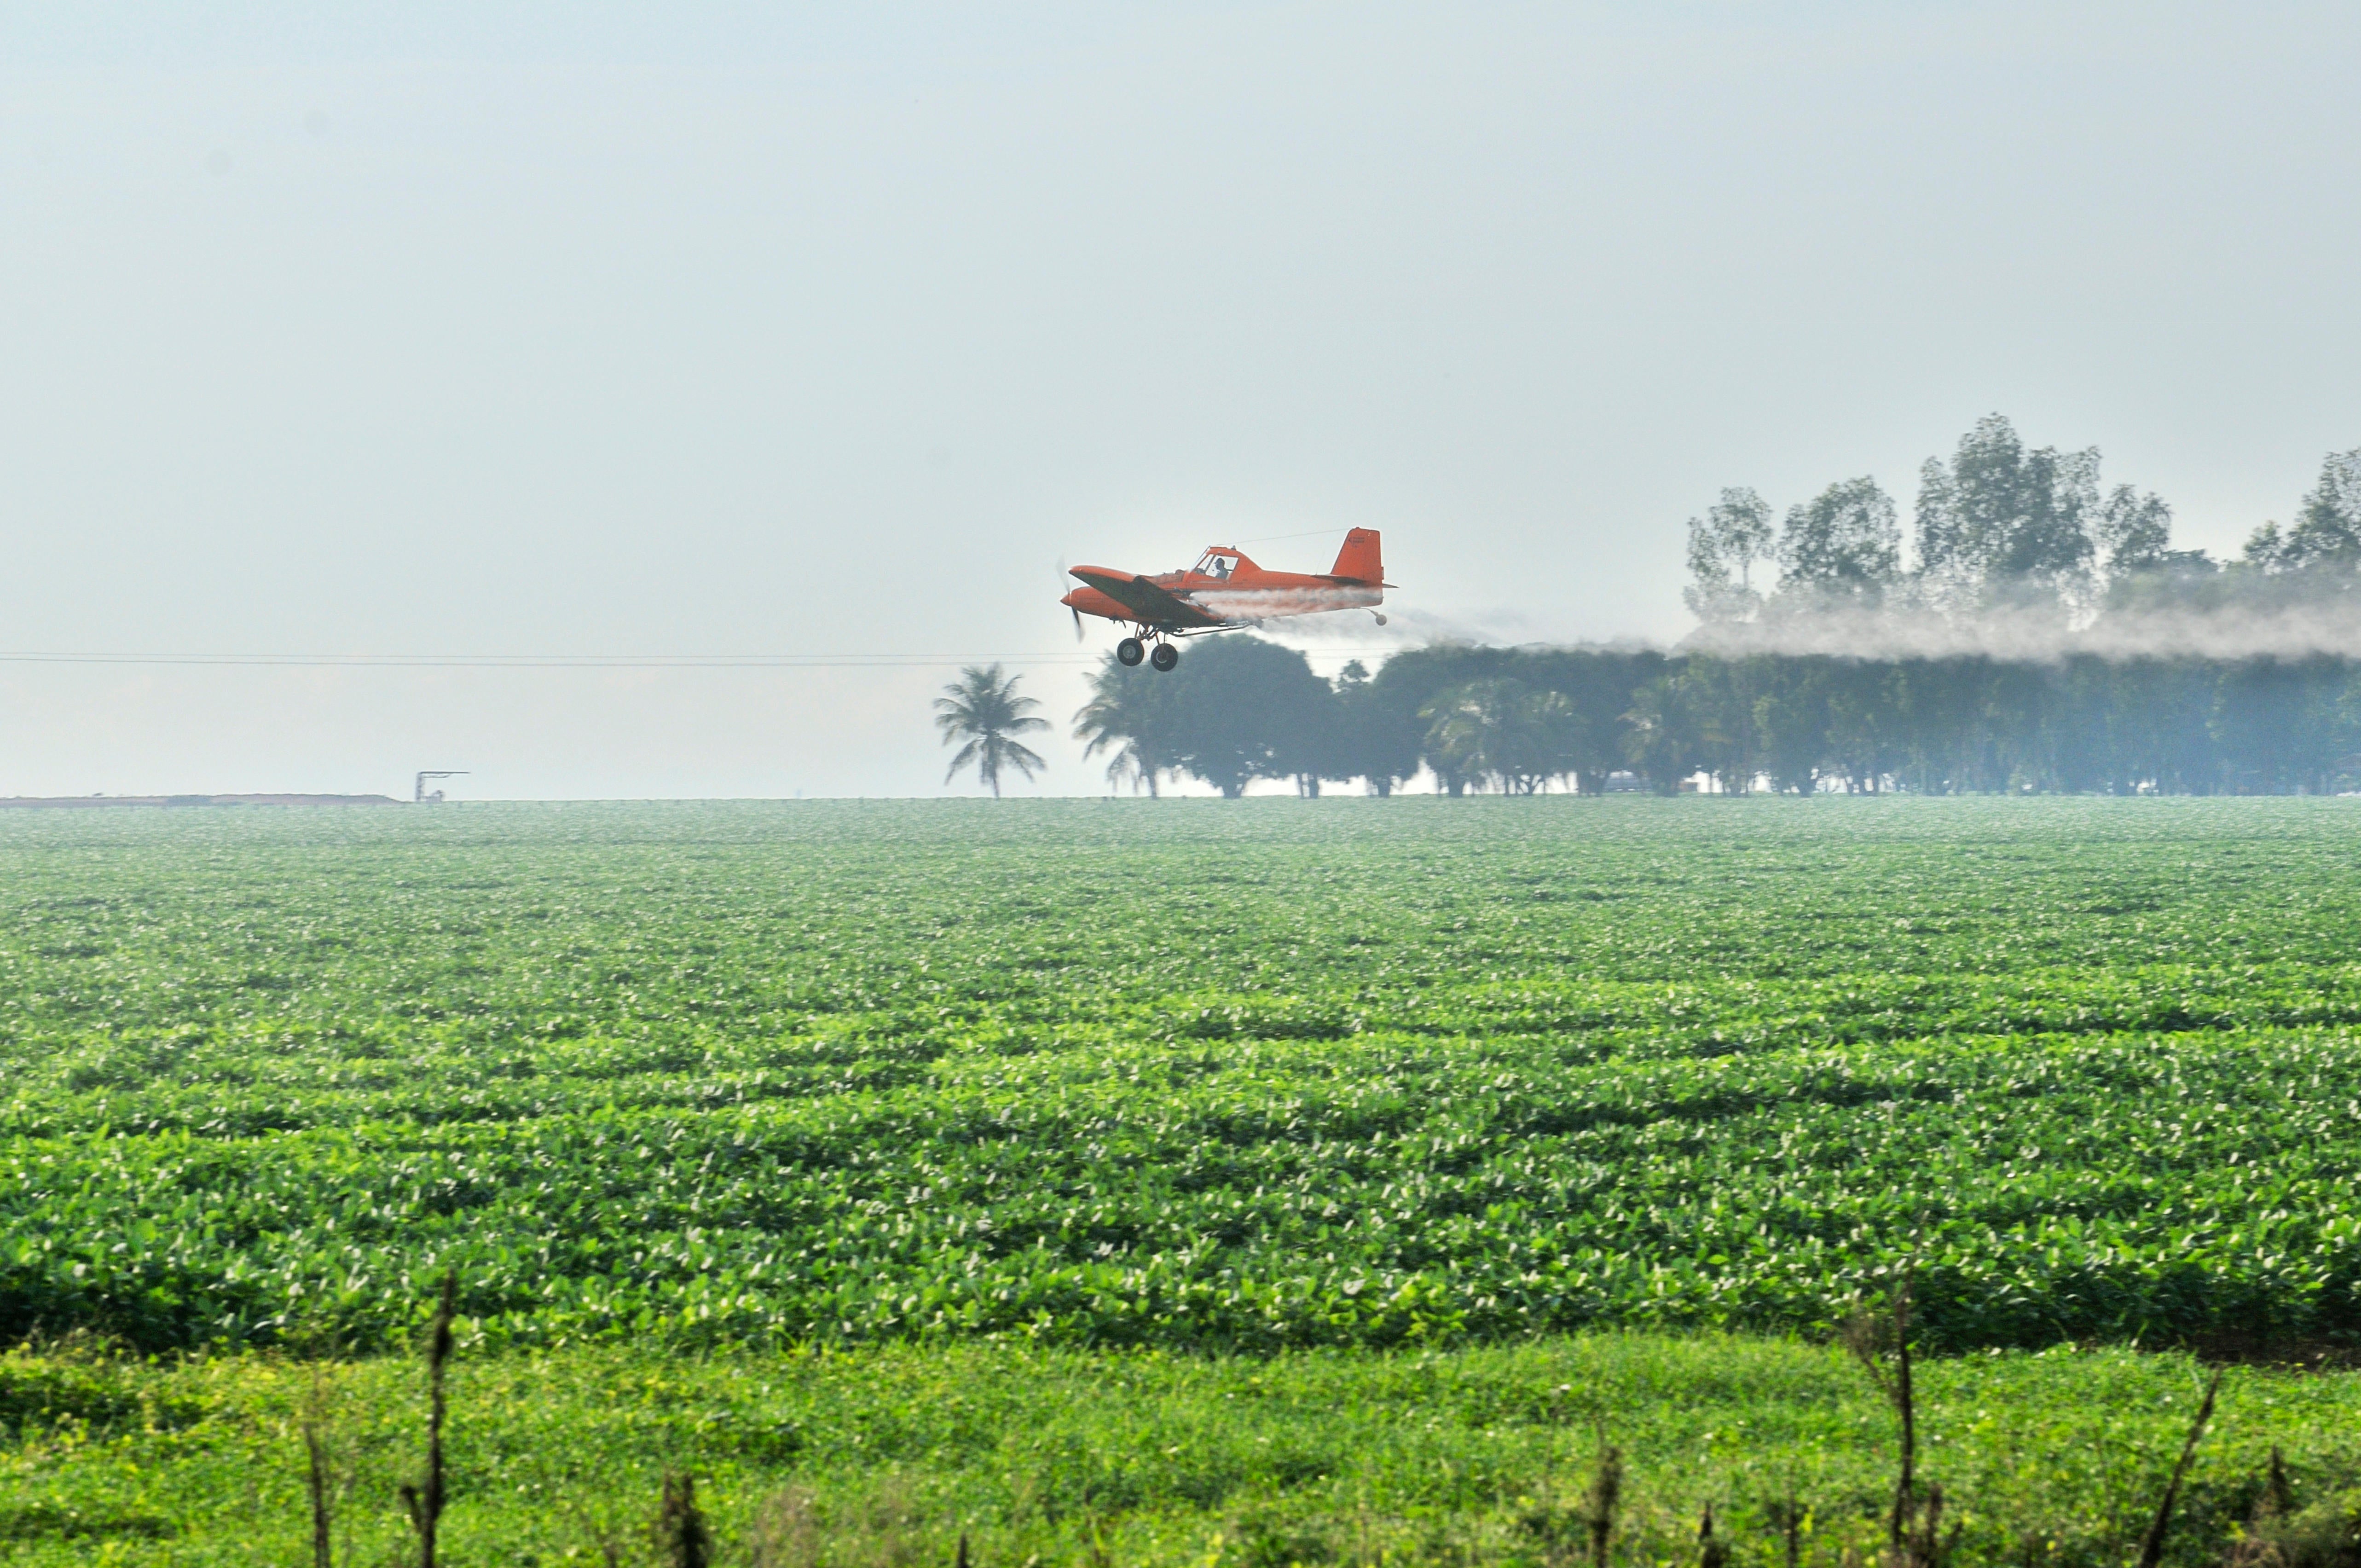 What Happens When You Deny Scientific Evidence? Look at Brazil's Pesticide Problem